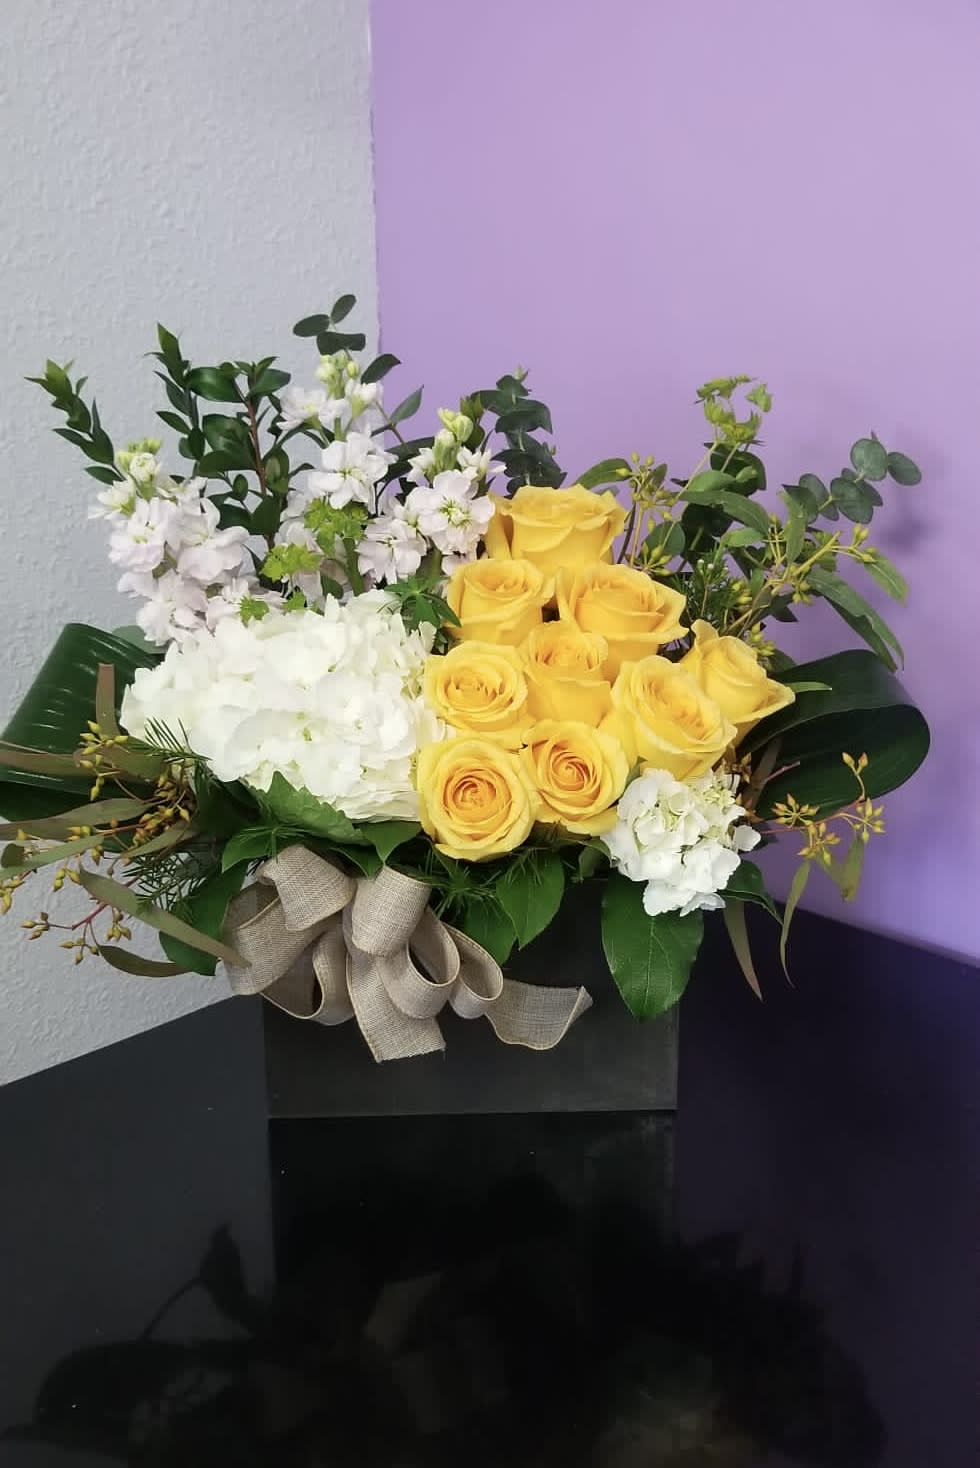 Made for Mom - Beautiful soft fresh flower arrangement for mom, handpicked by our florists.